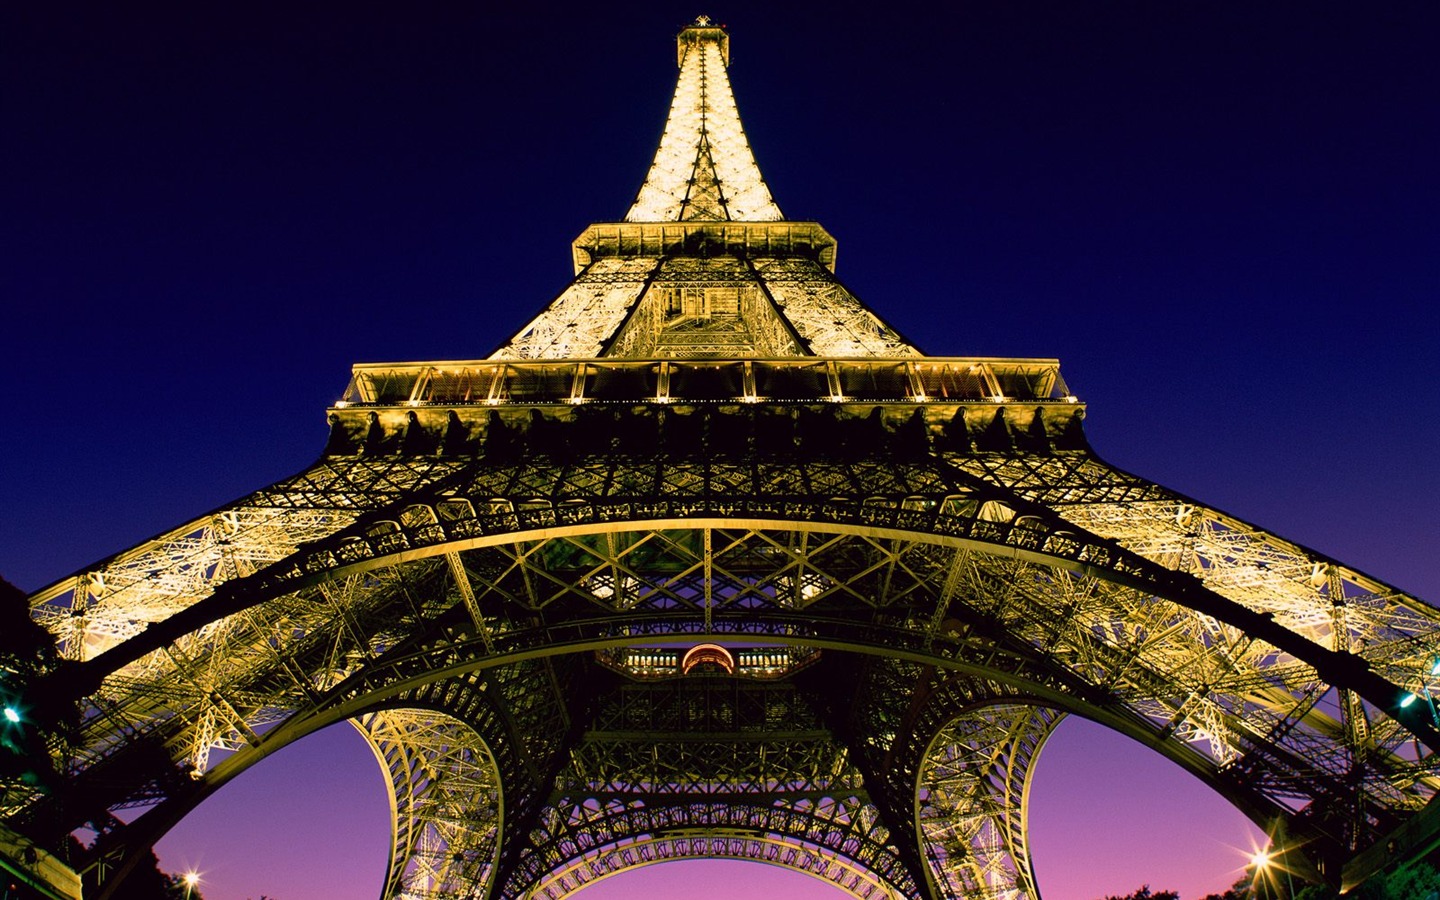 World scenery of the French wallpaper #2 - 1440x900